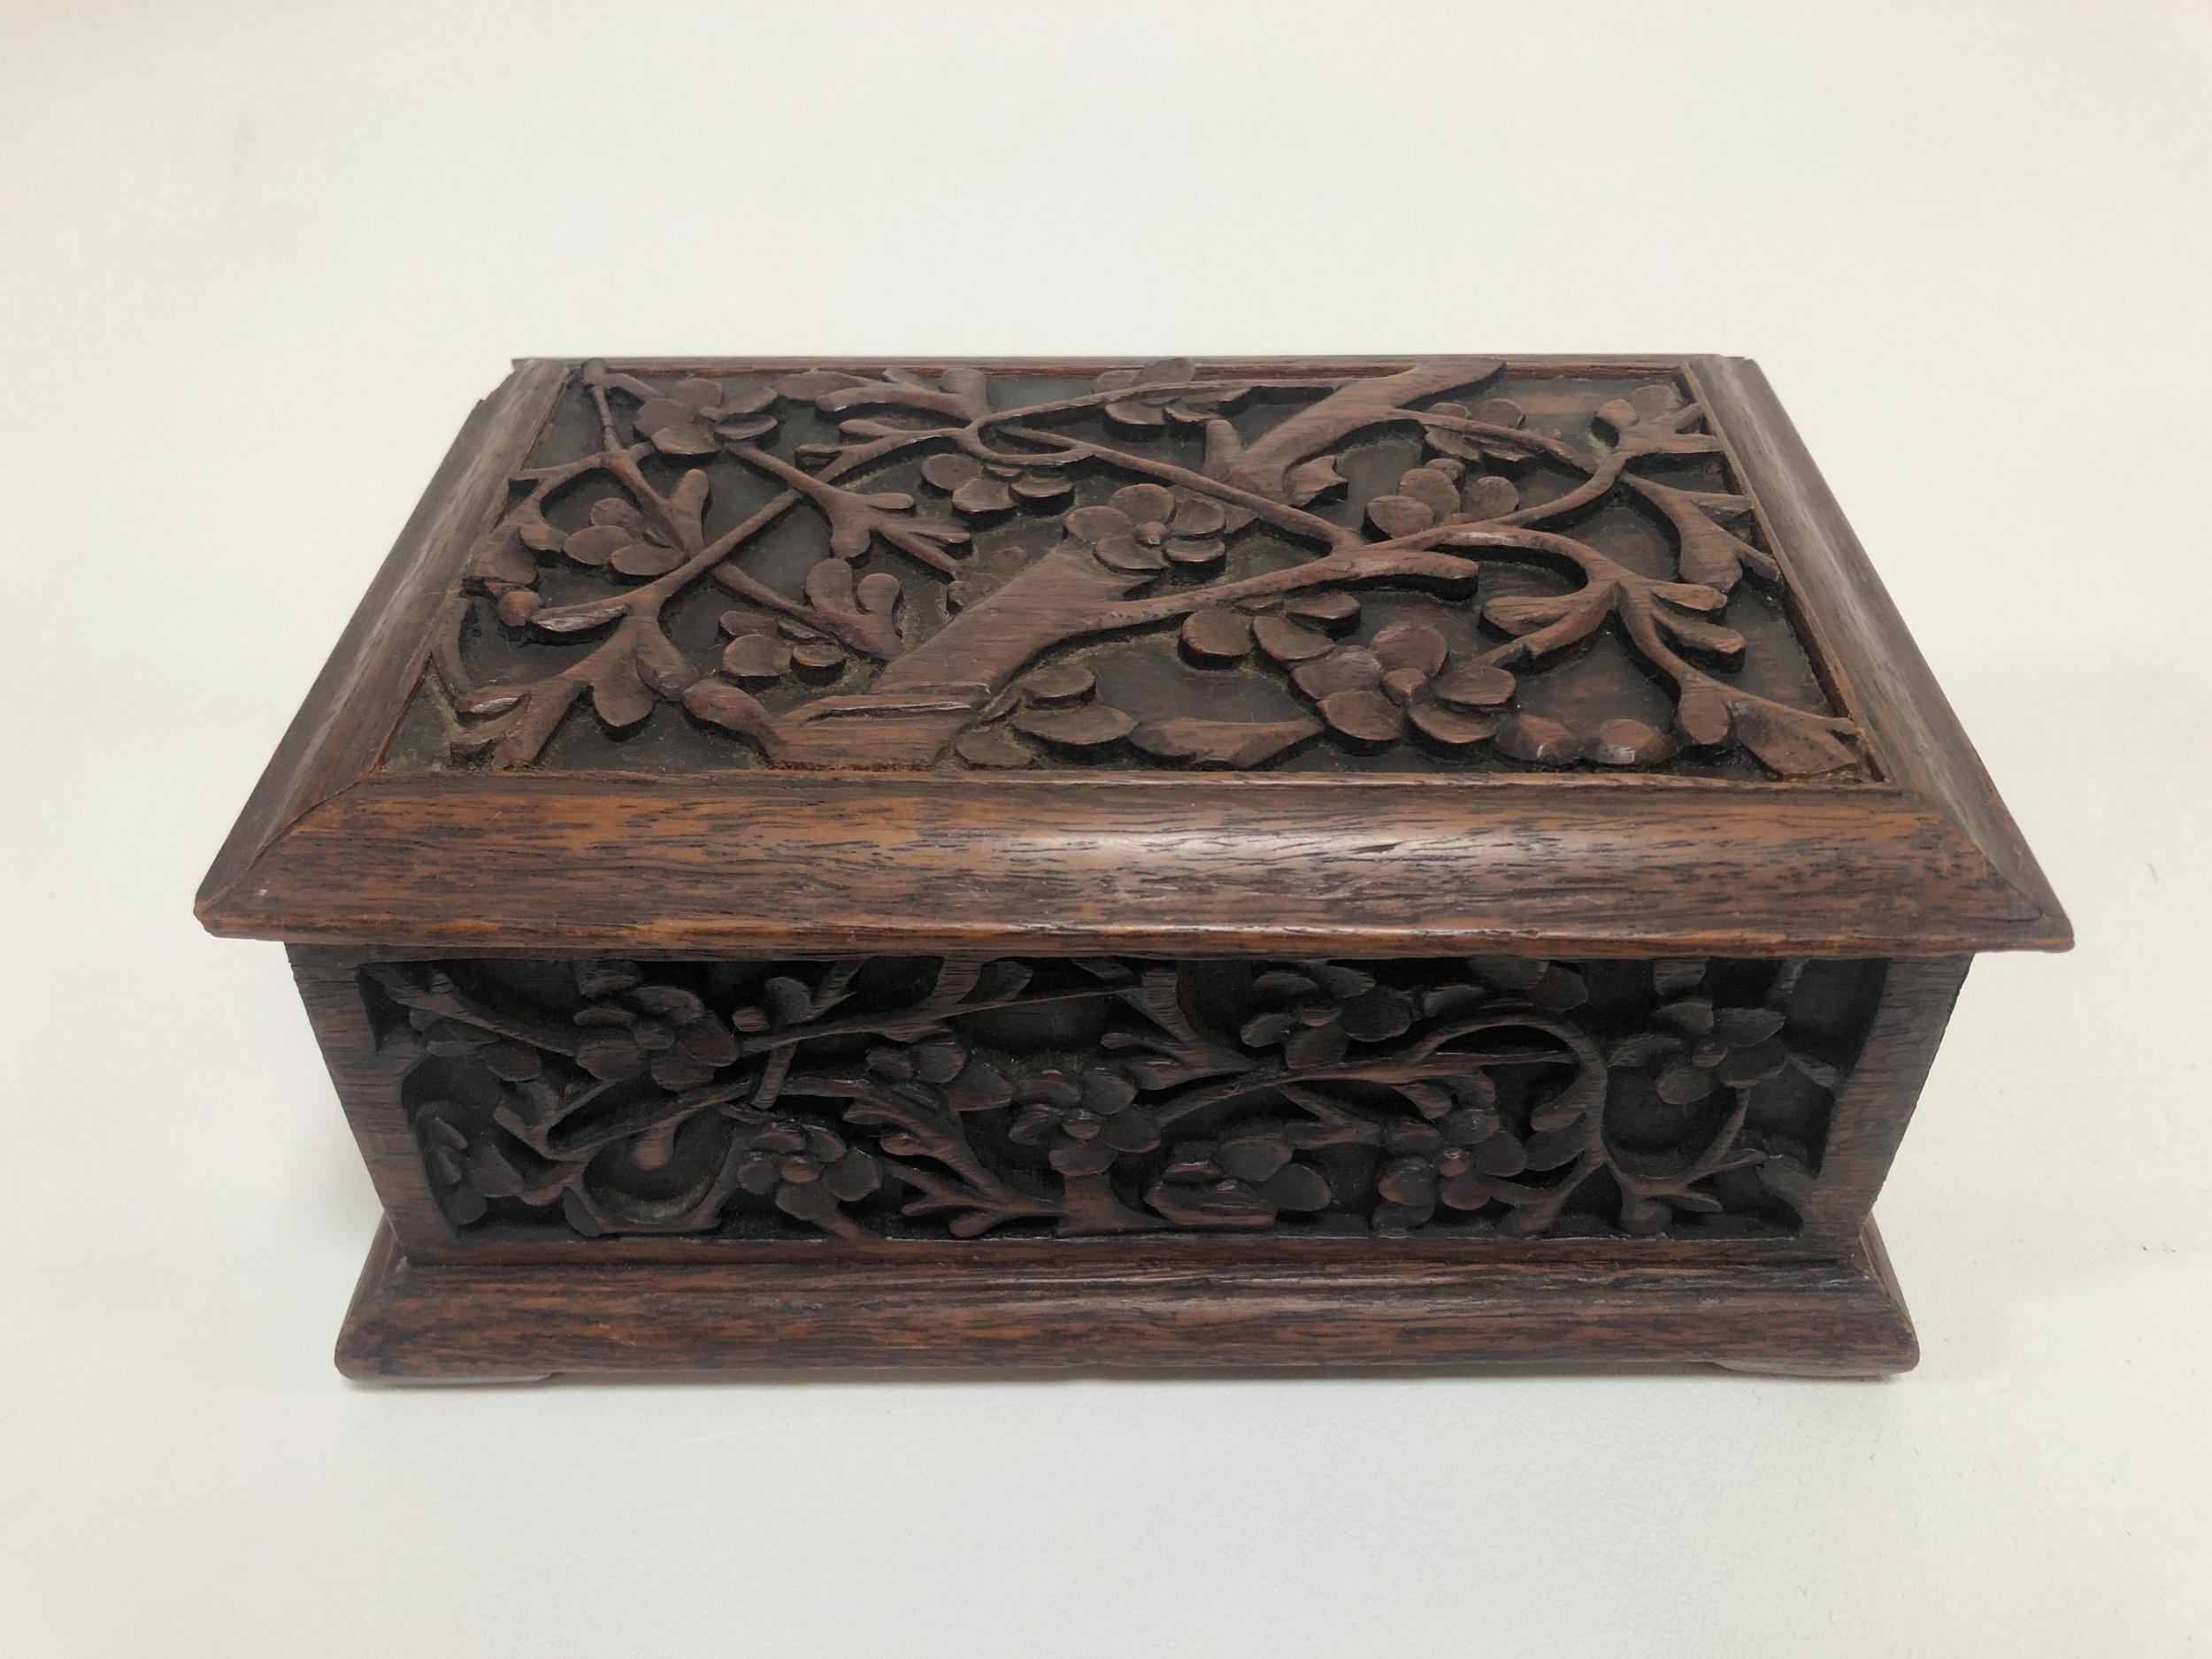 This is a beautifully hand-carved rosewood keepsake or jewelry box from the 1920's. It features a lovely floral pattern on all four sides of the box and the lid. The lid is completely removable with no hinges.